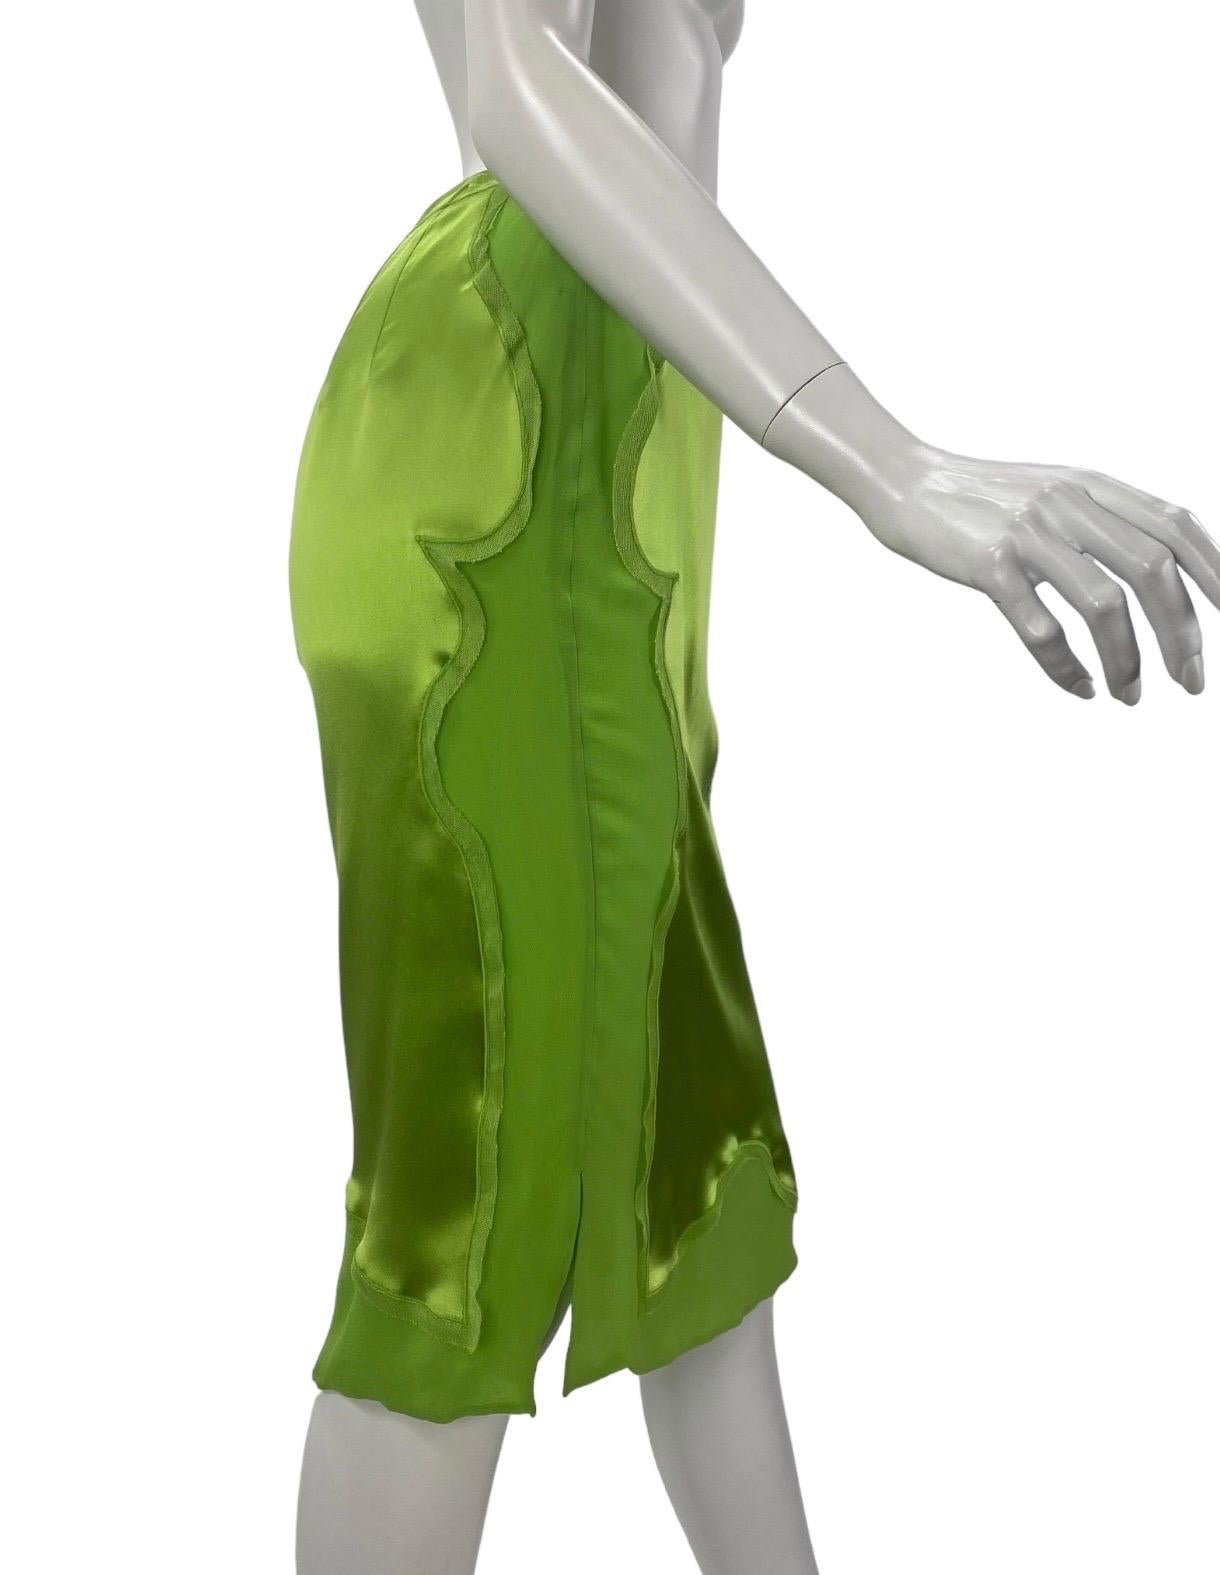 Green F/W 2004 Vintage Tom Ford for Yves Saint Laurent Chinoiserie Silk Skirt Sz 6 NWT For Sale